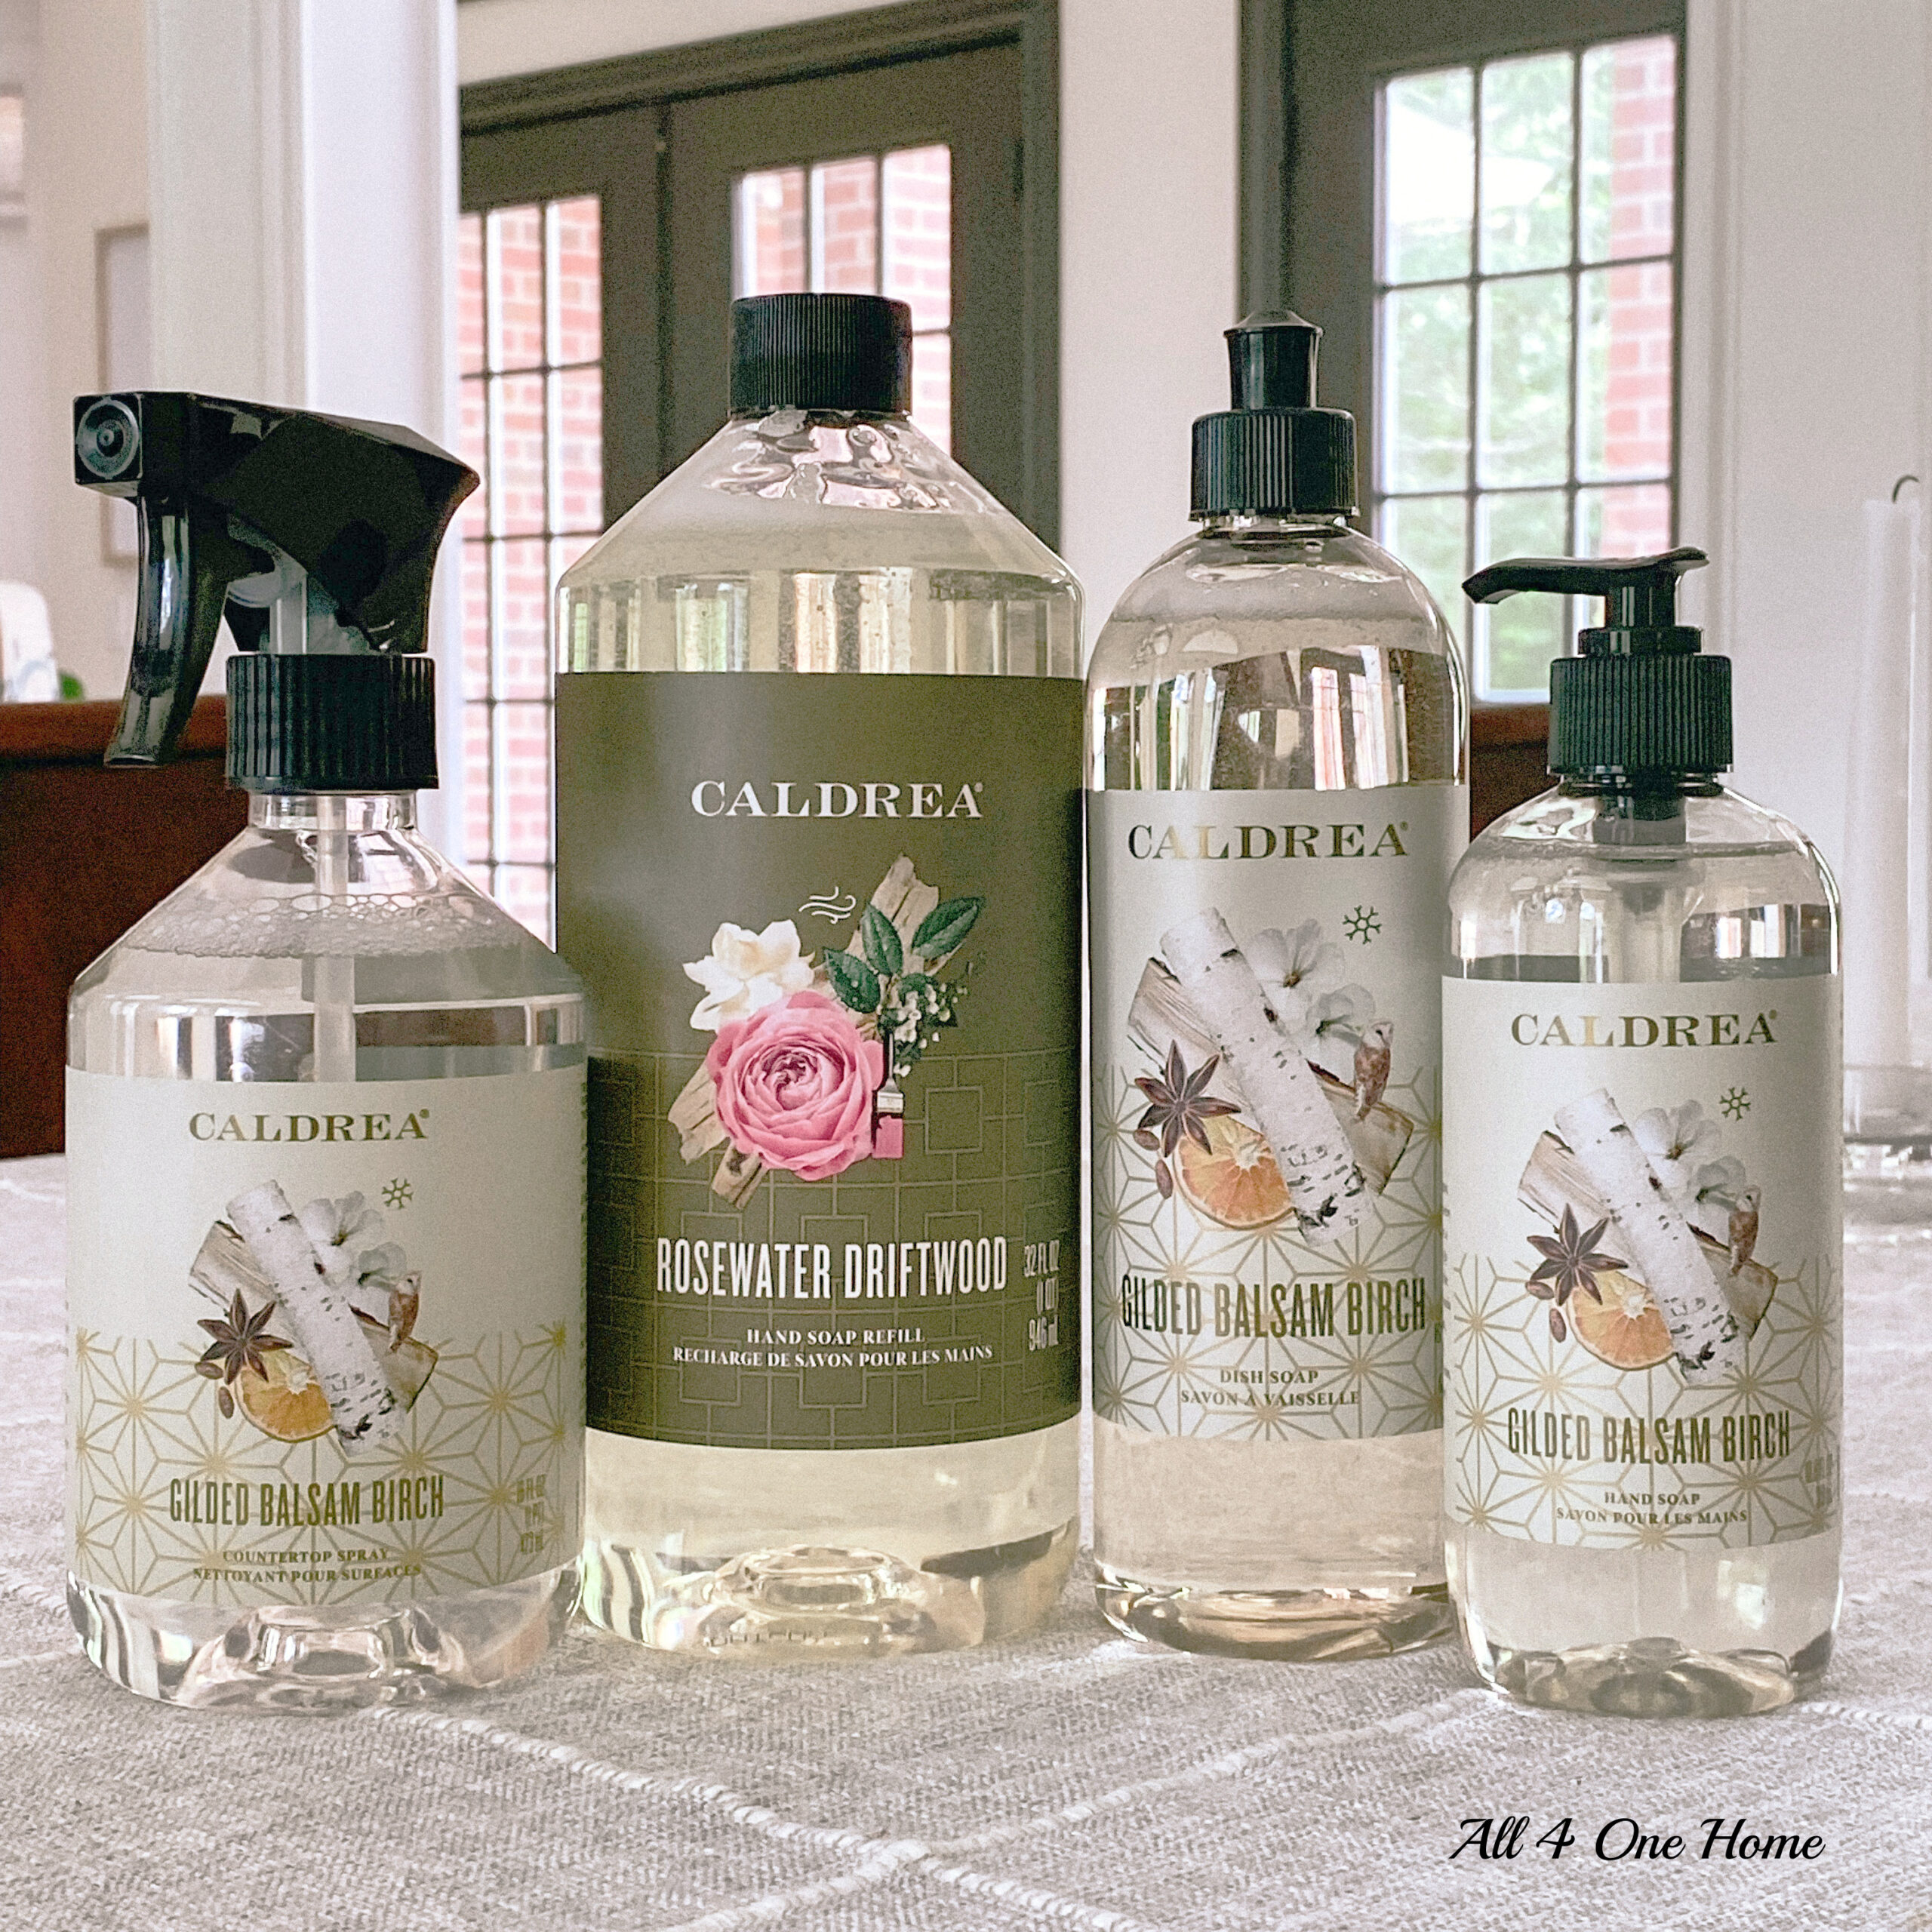 My signature home scents